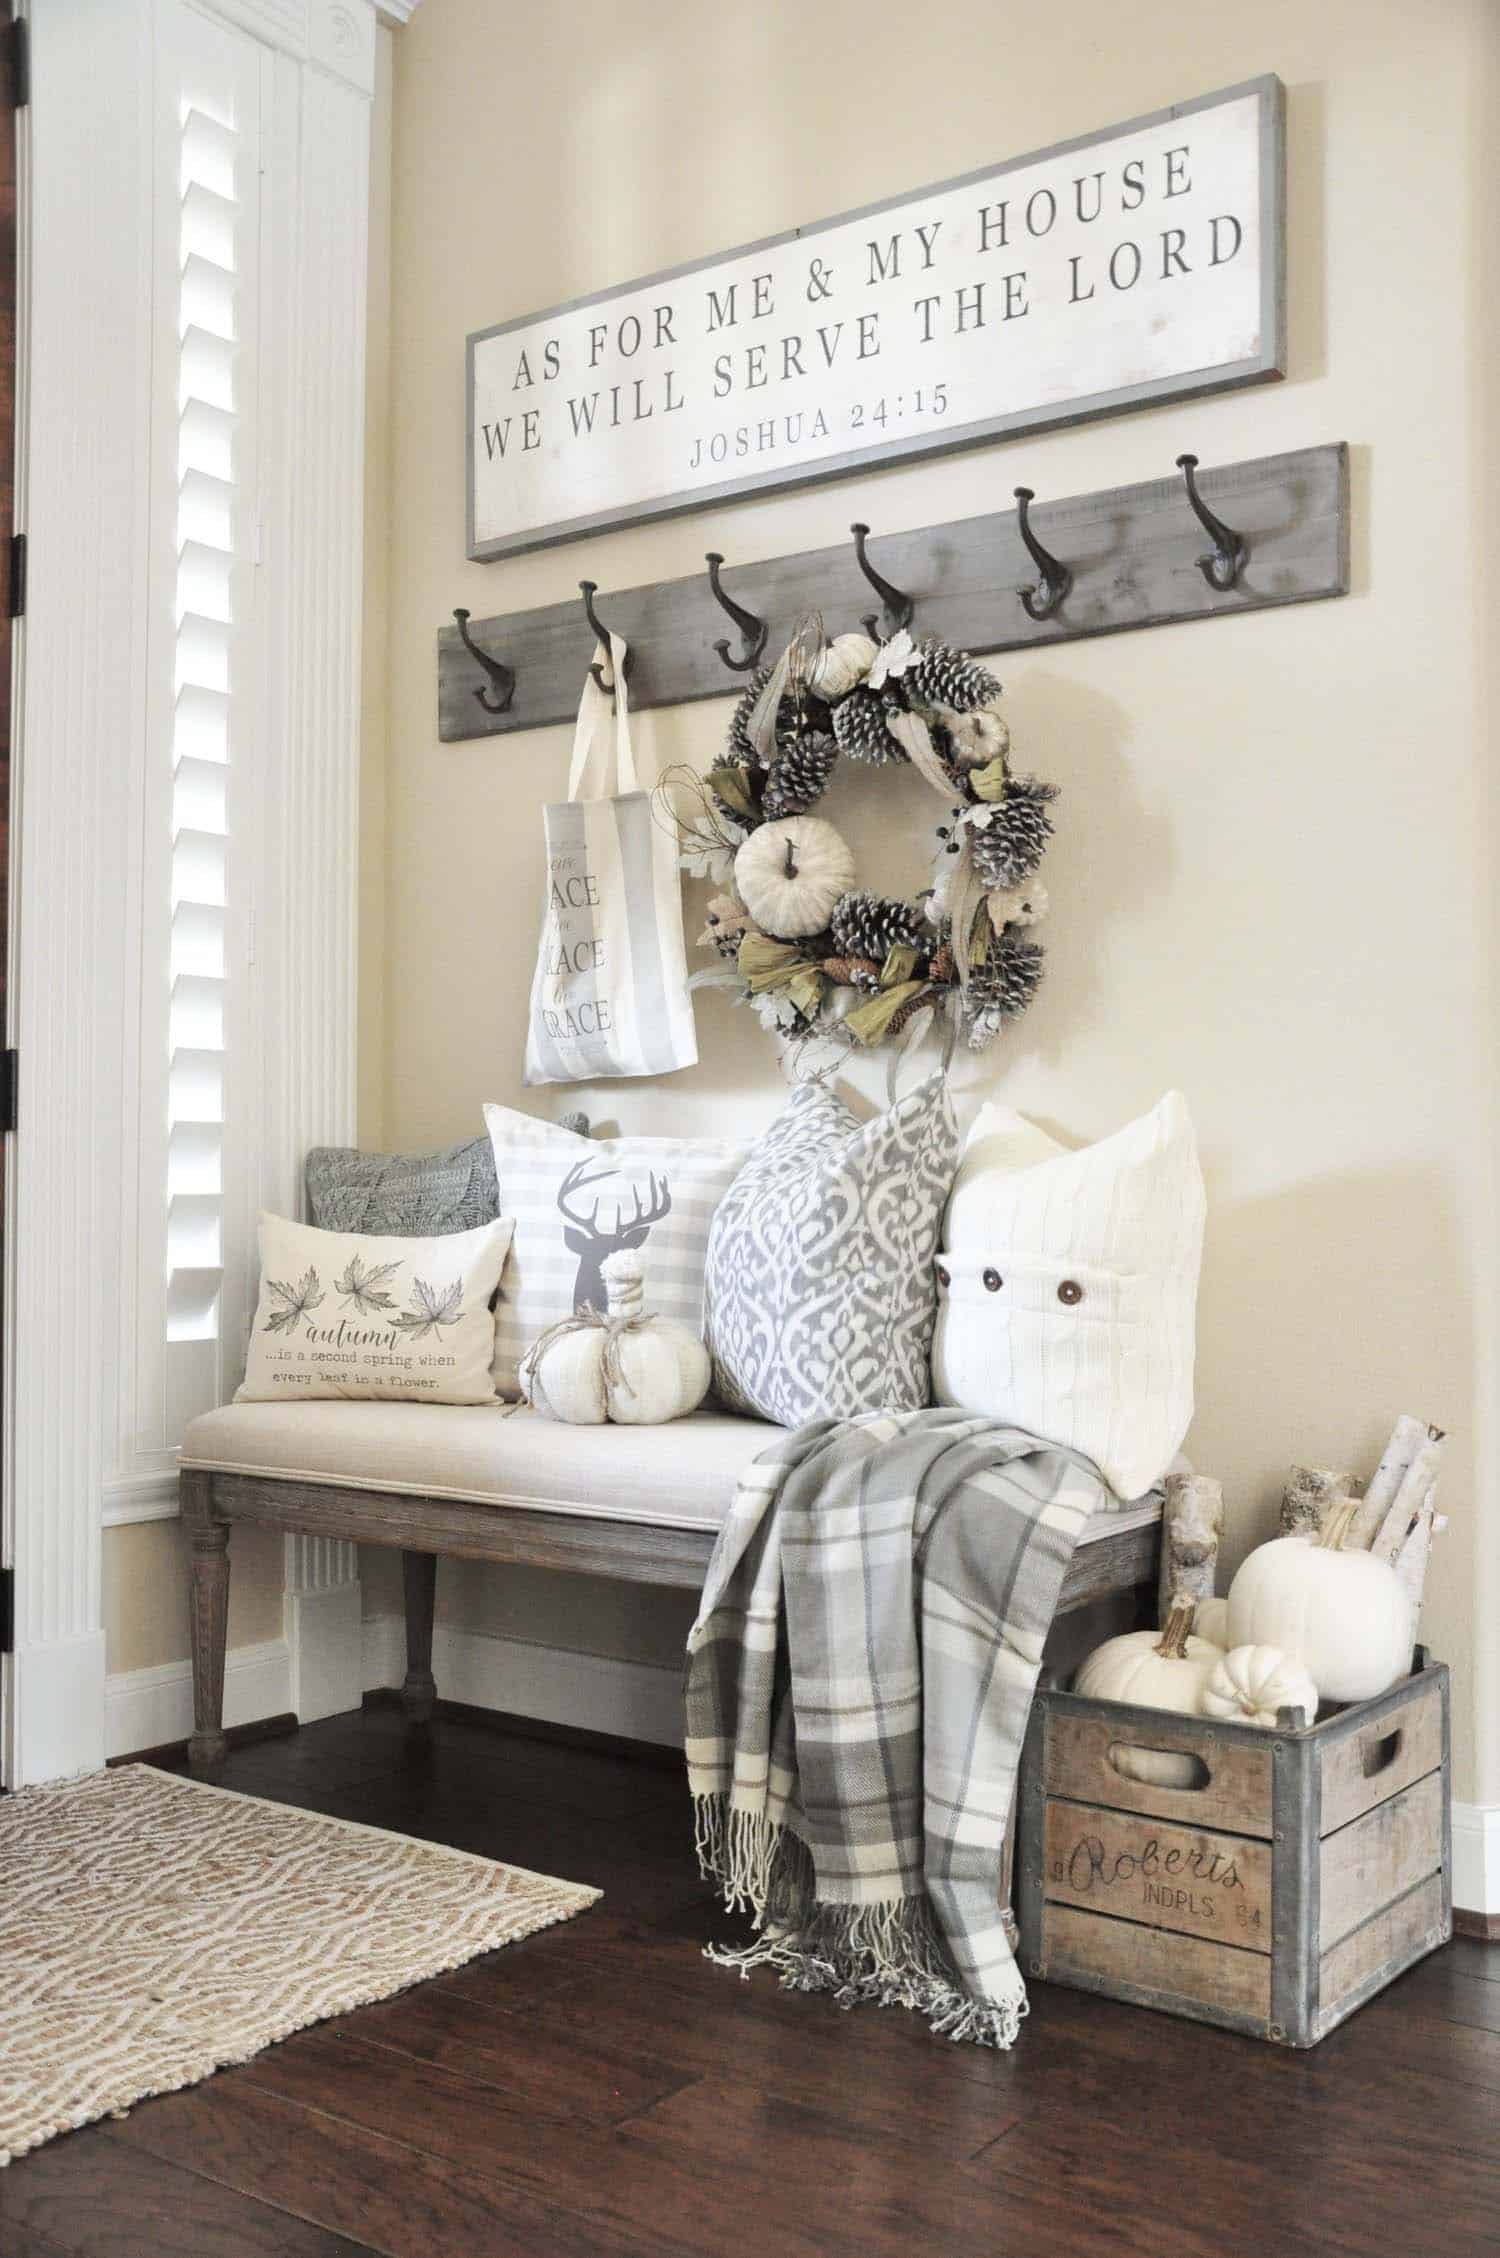 Fall-Inspired Entryway Decorating Ideas-10-1 Kindesign